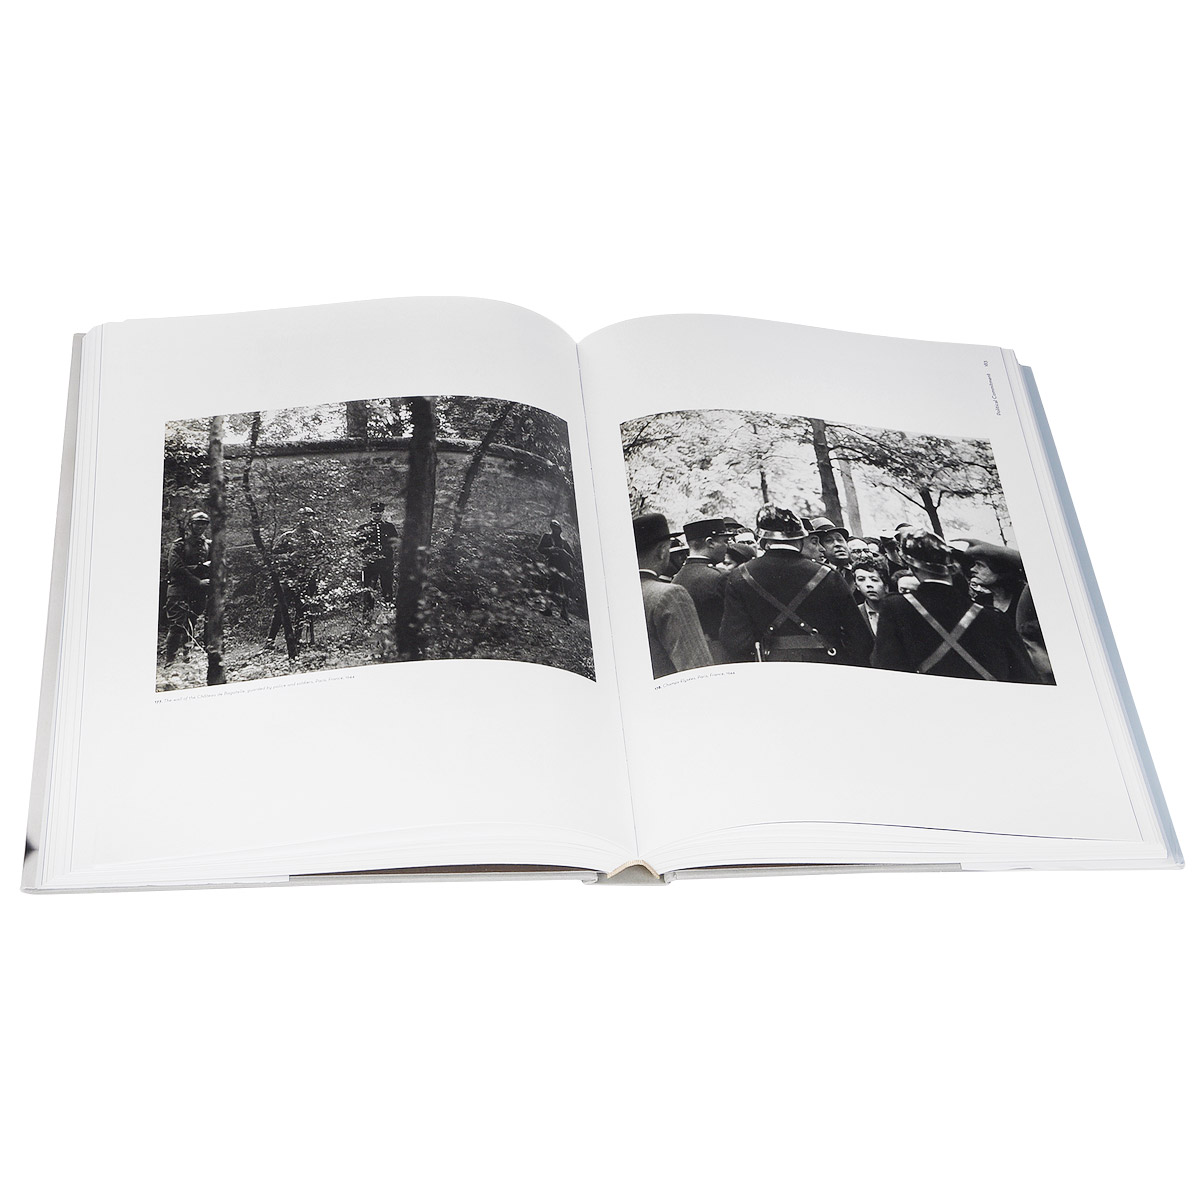 Henri Cartier-Bresson: Here and Now